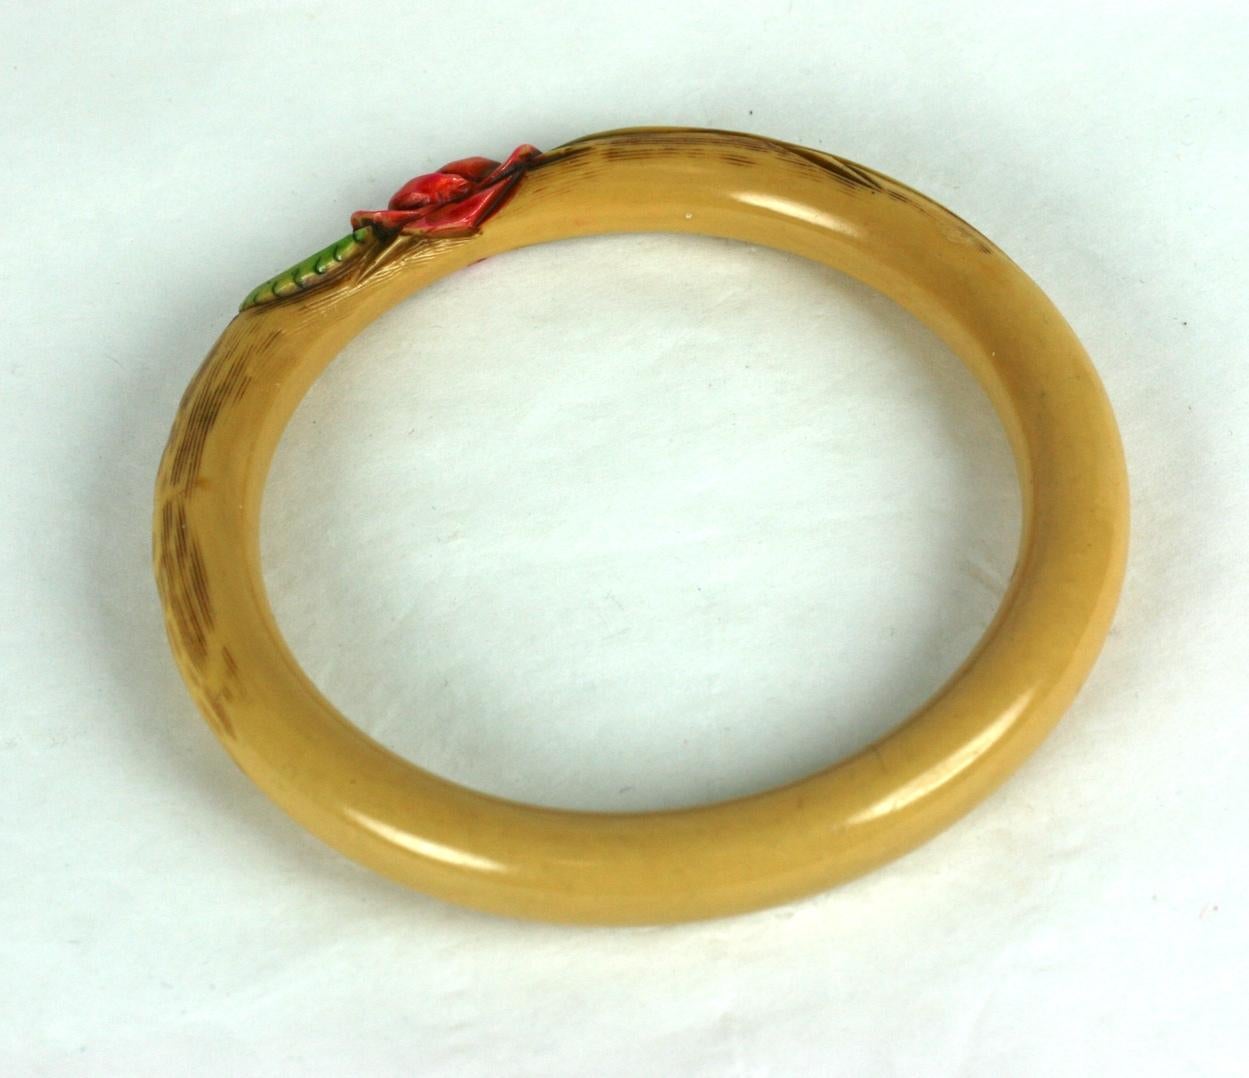 French Art deco carved bakelite rose bangle bracelet. The tubular cream color bracelet all hand carved with a sienna brown stain and cold painted with pink unfurling rose and green stained leaves
Excellent Condition. 1920's France.
Width